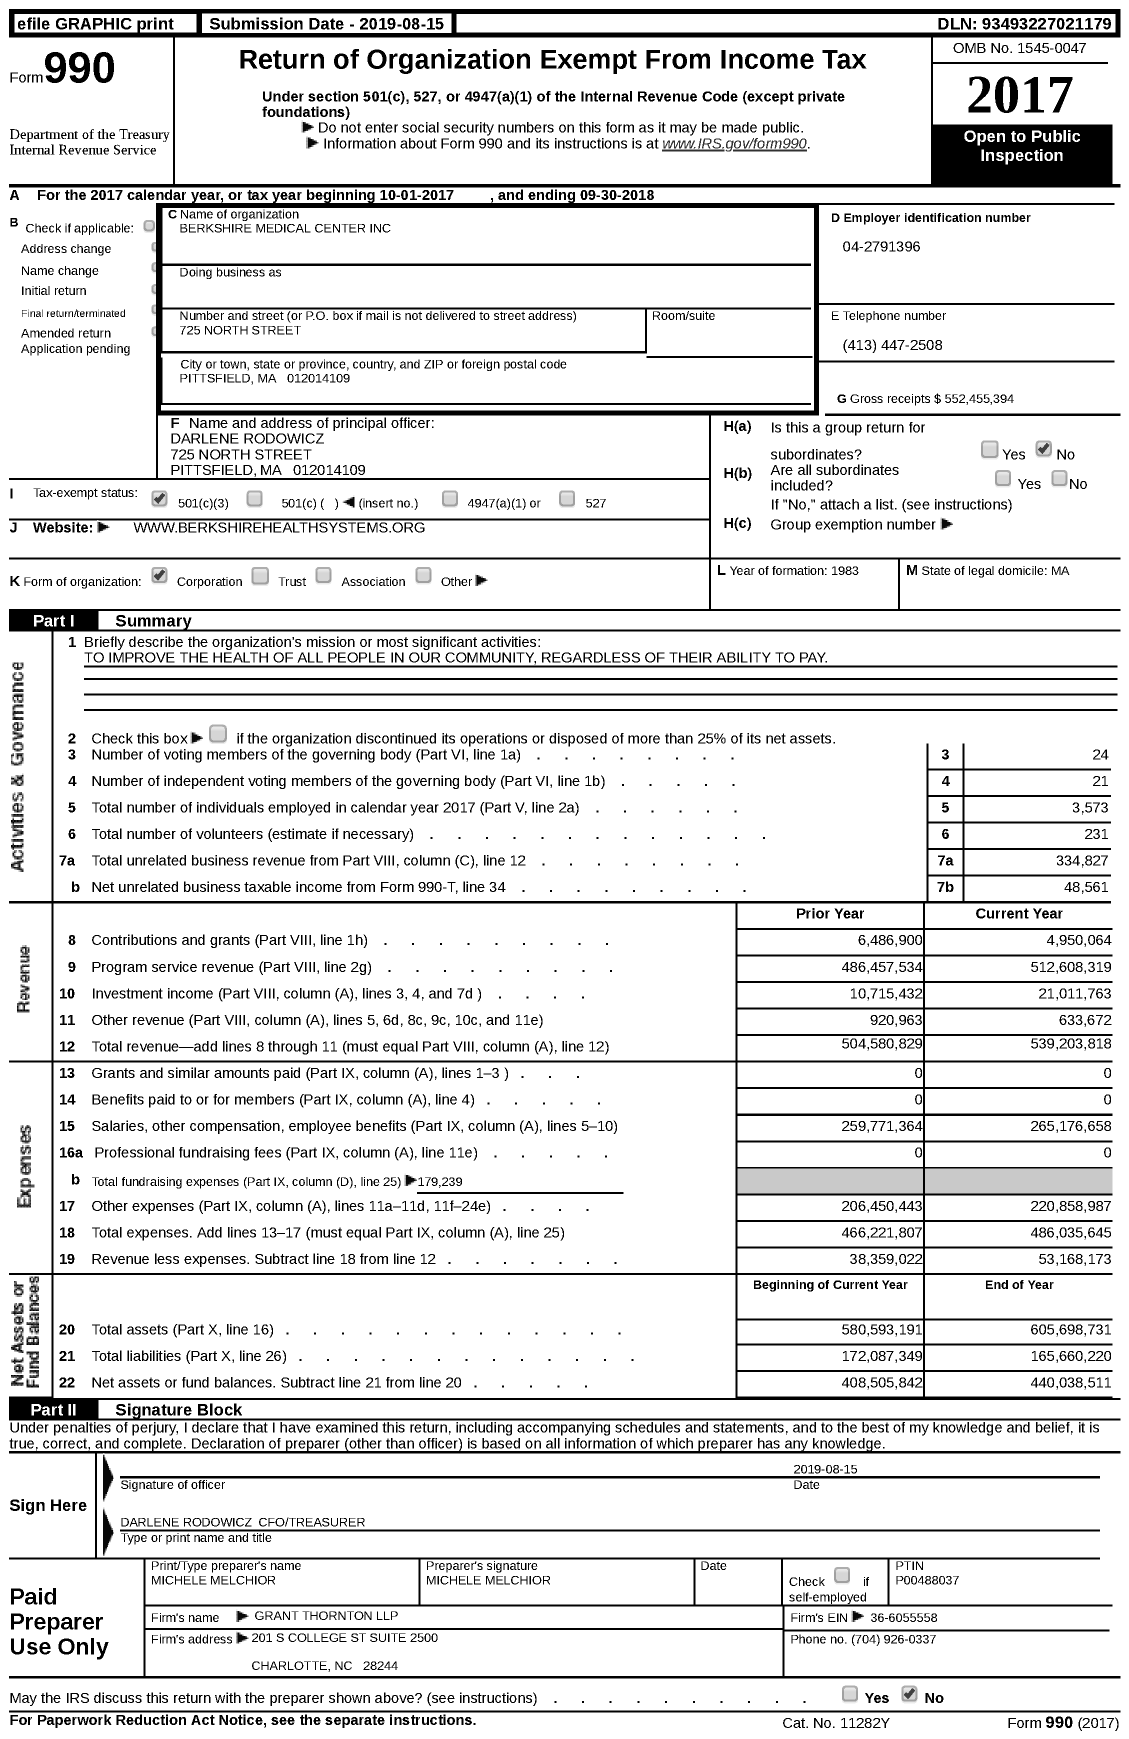 Image of first page of 2017 Form 990 for Berkshire Medical Center (BMC)